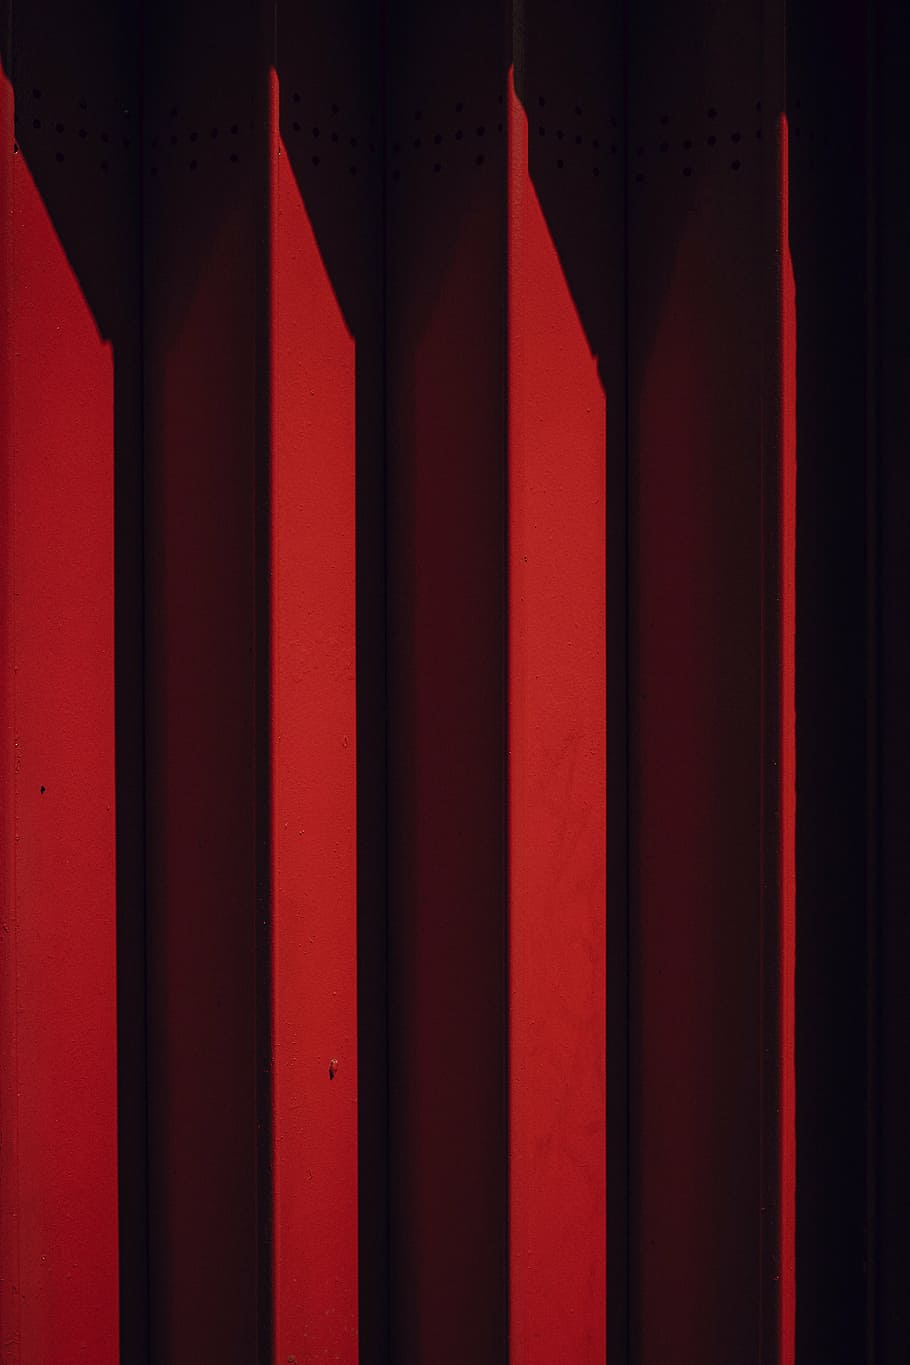 untitled, steel, wall, red, sunny, day, backgrounds, full frame, indoors, curtain